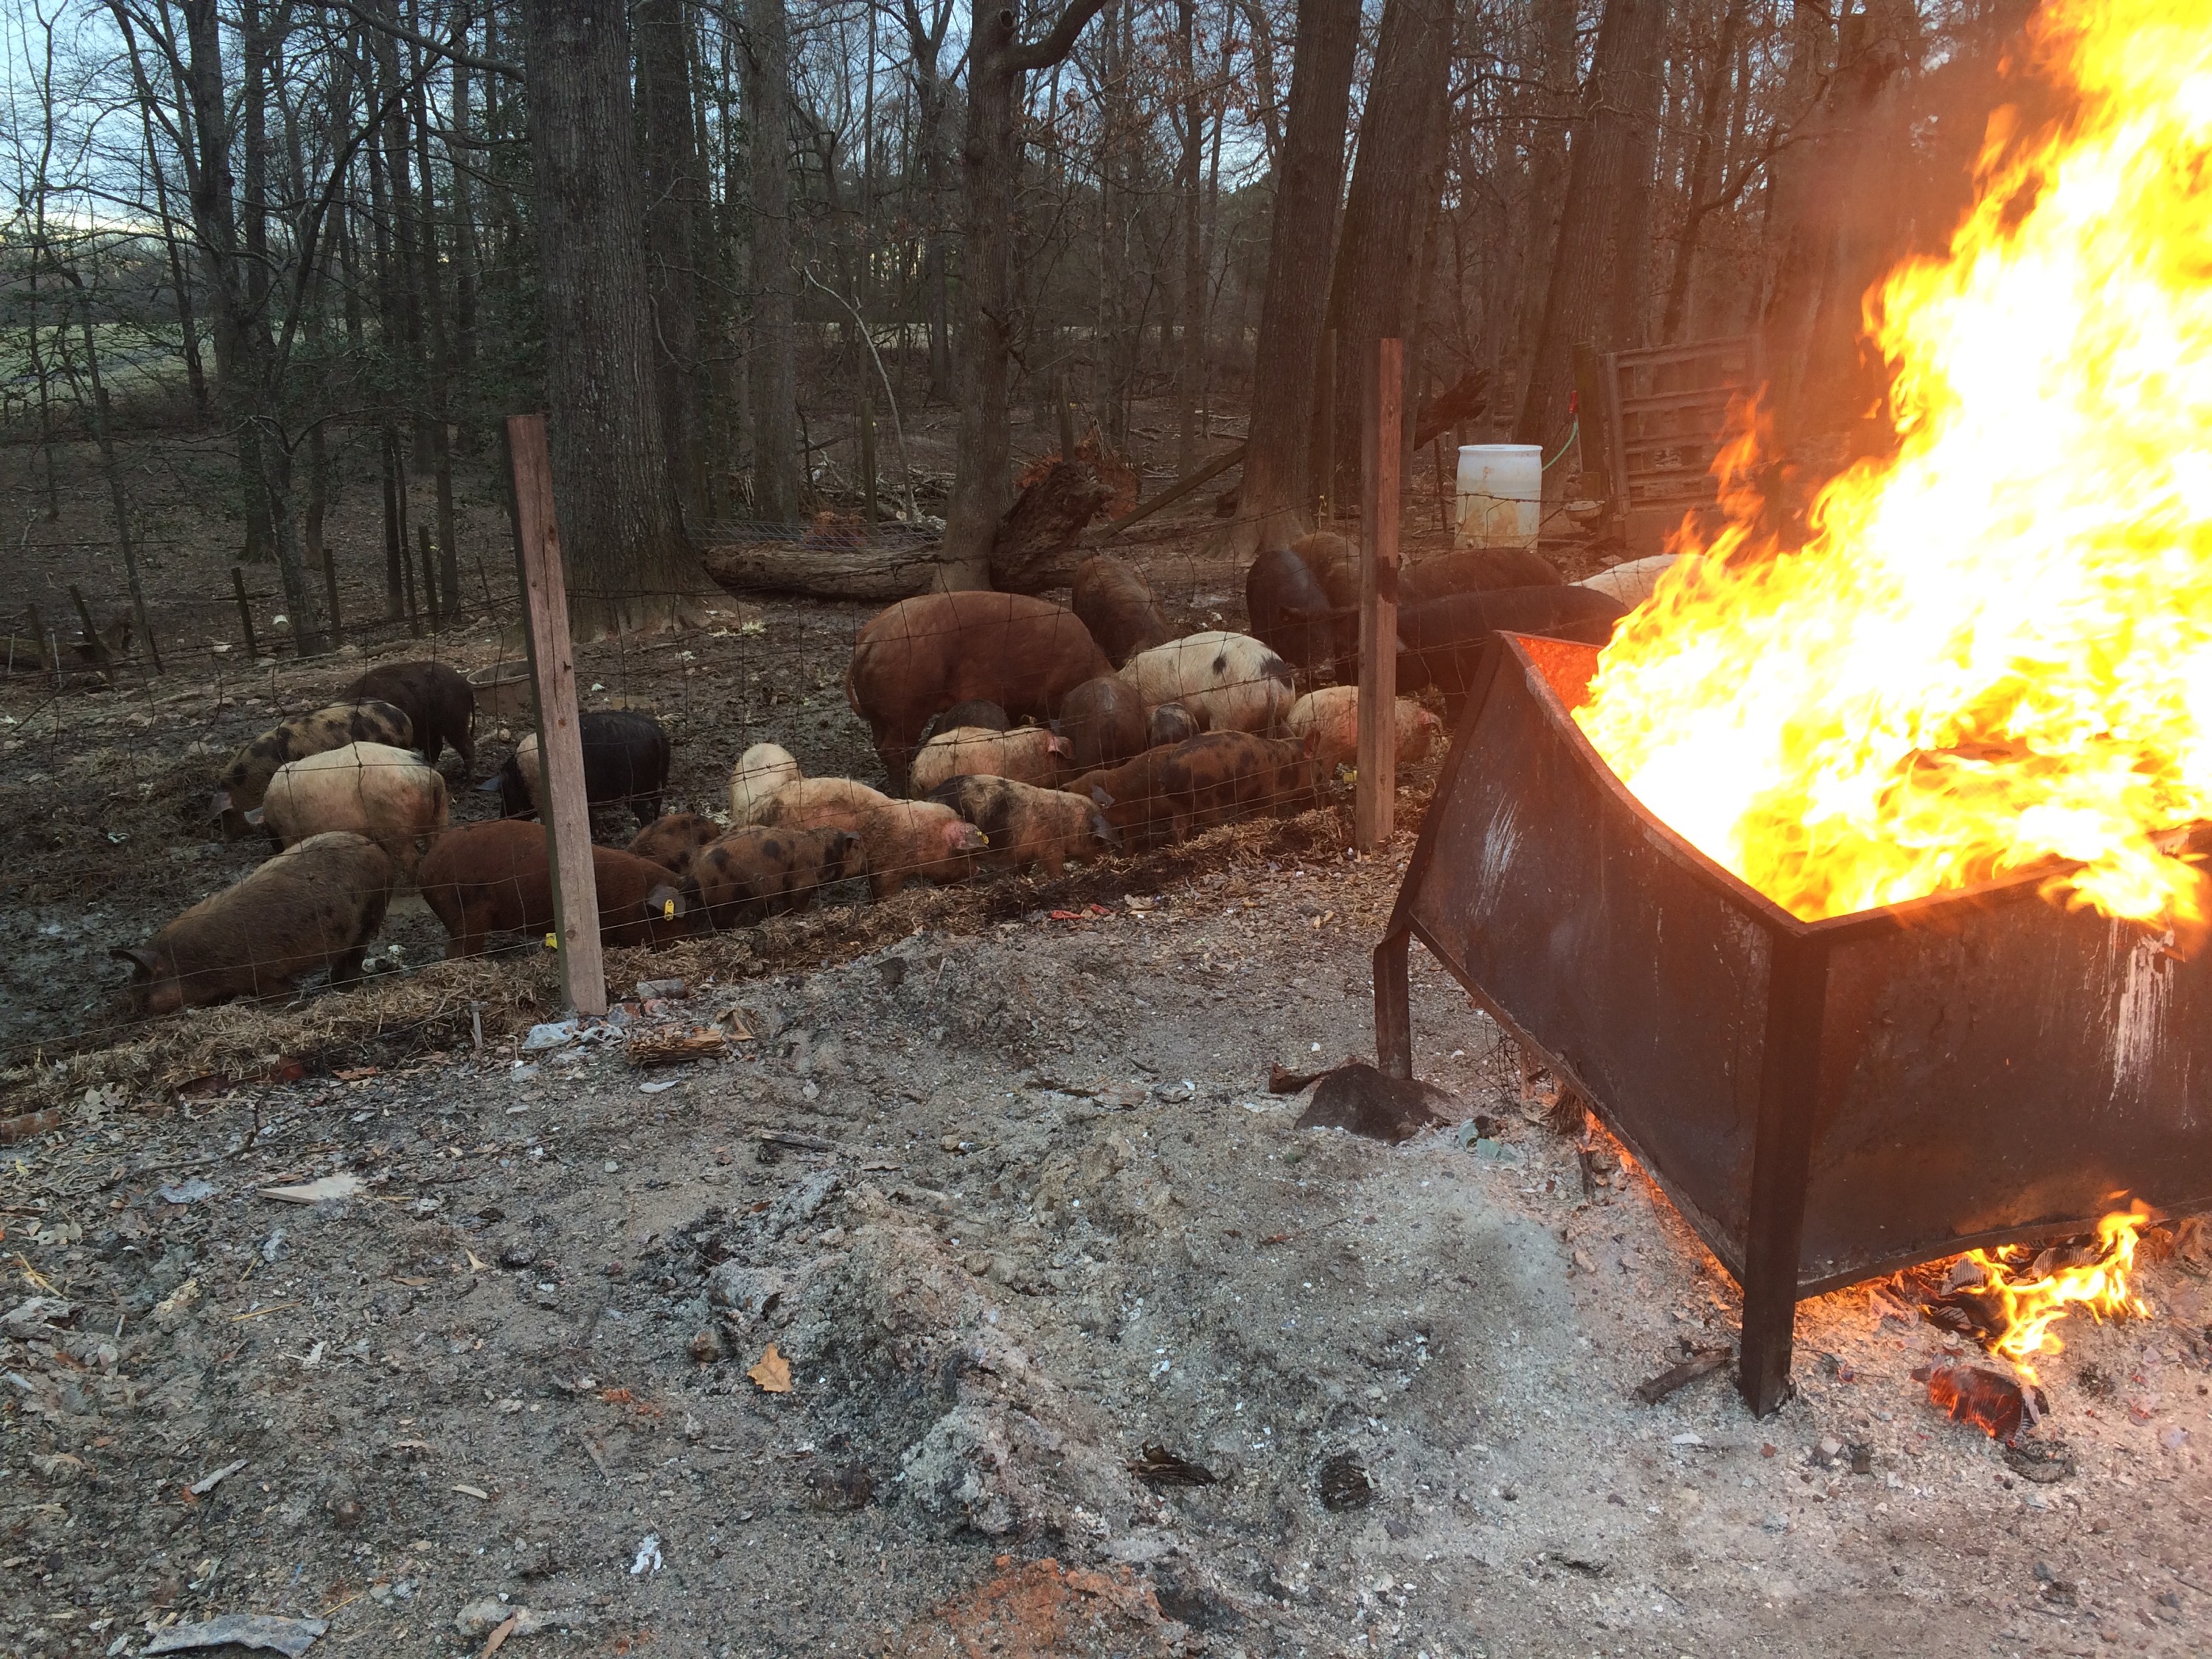 Pigs warming themselves by the fire